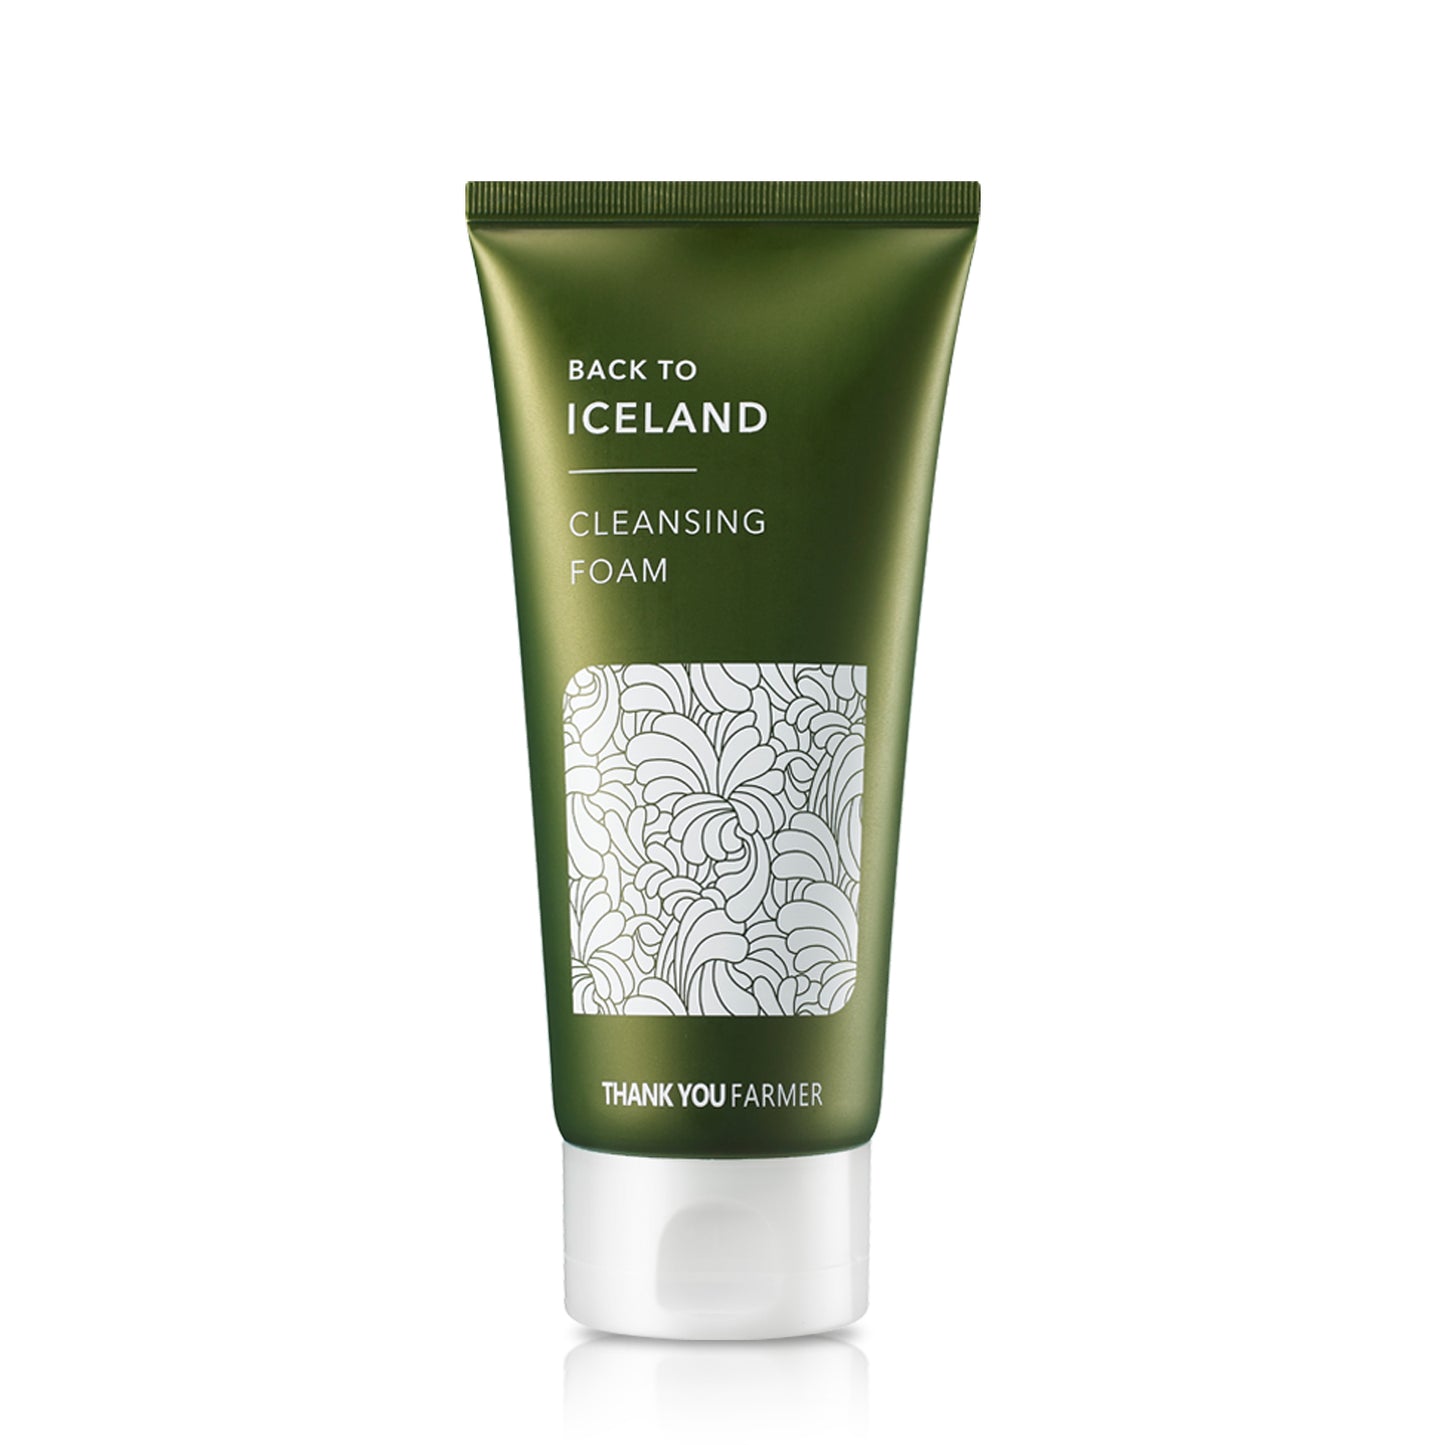 Back to Iceland cleansing foam - 120ml